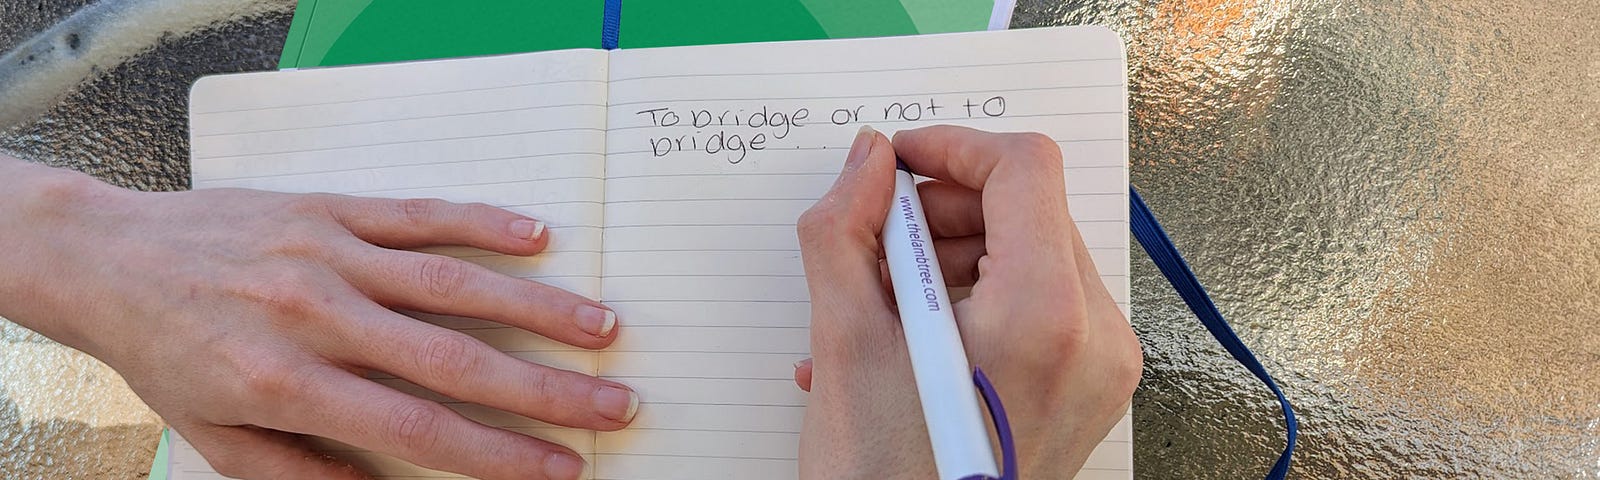 A writer writes in her notebook “To bridge or not to bridge”.